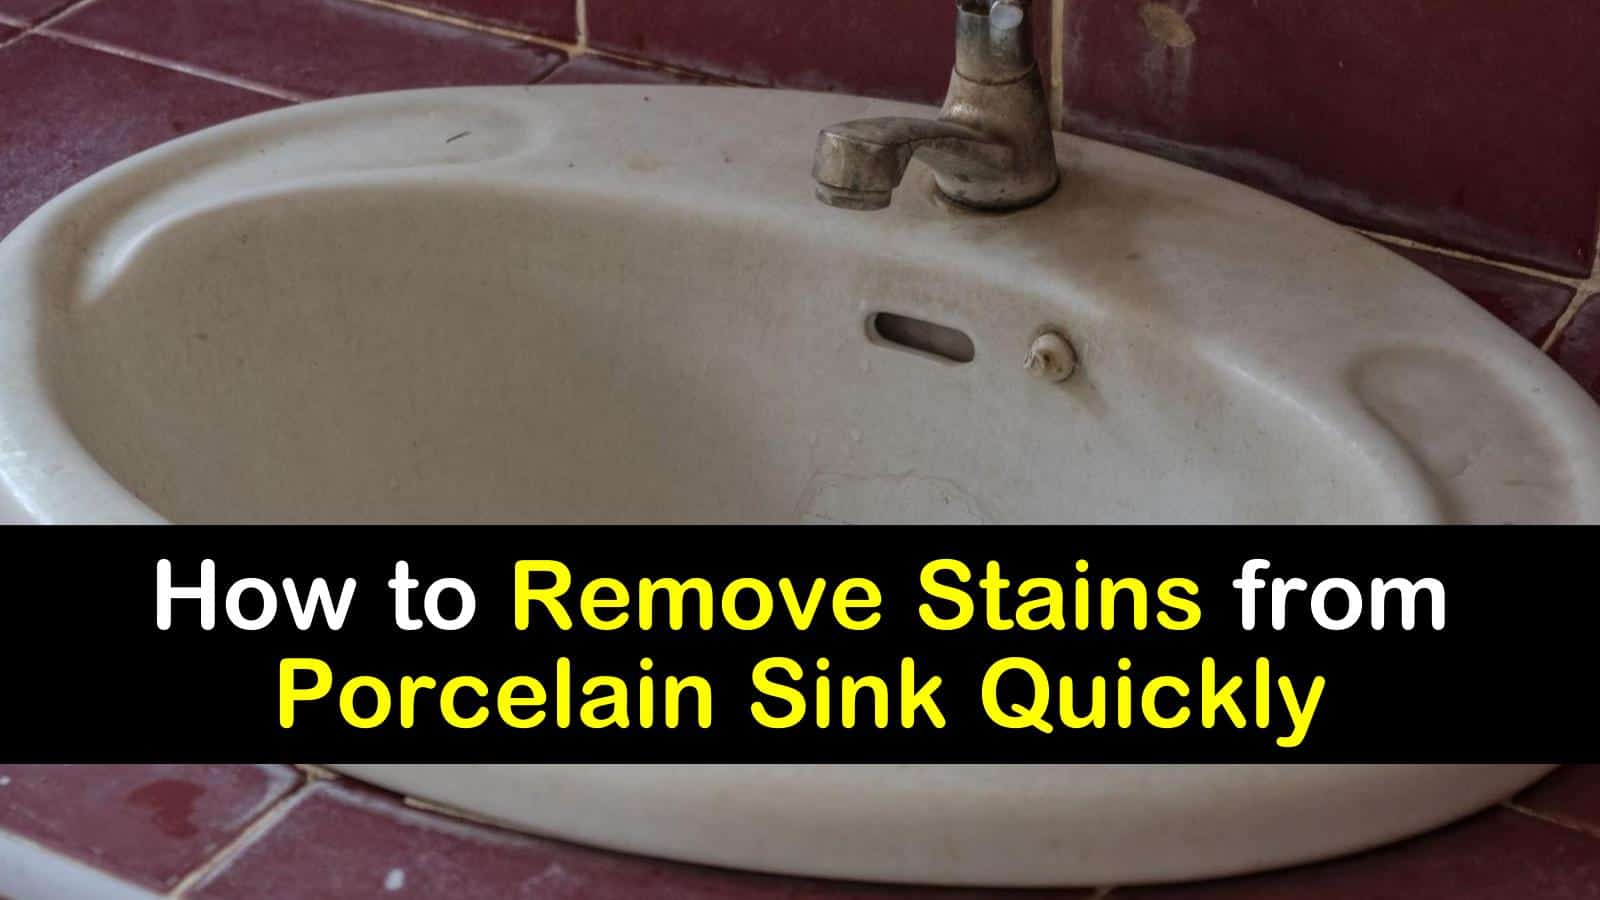 How to Remove Stains from Porcelain Sink Quickly